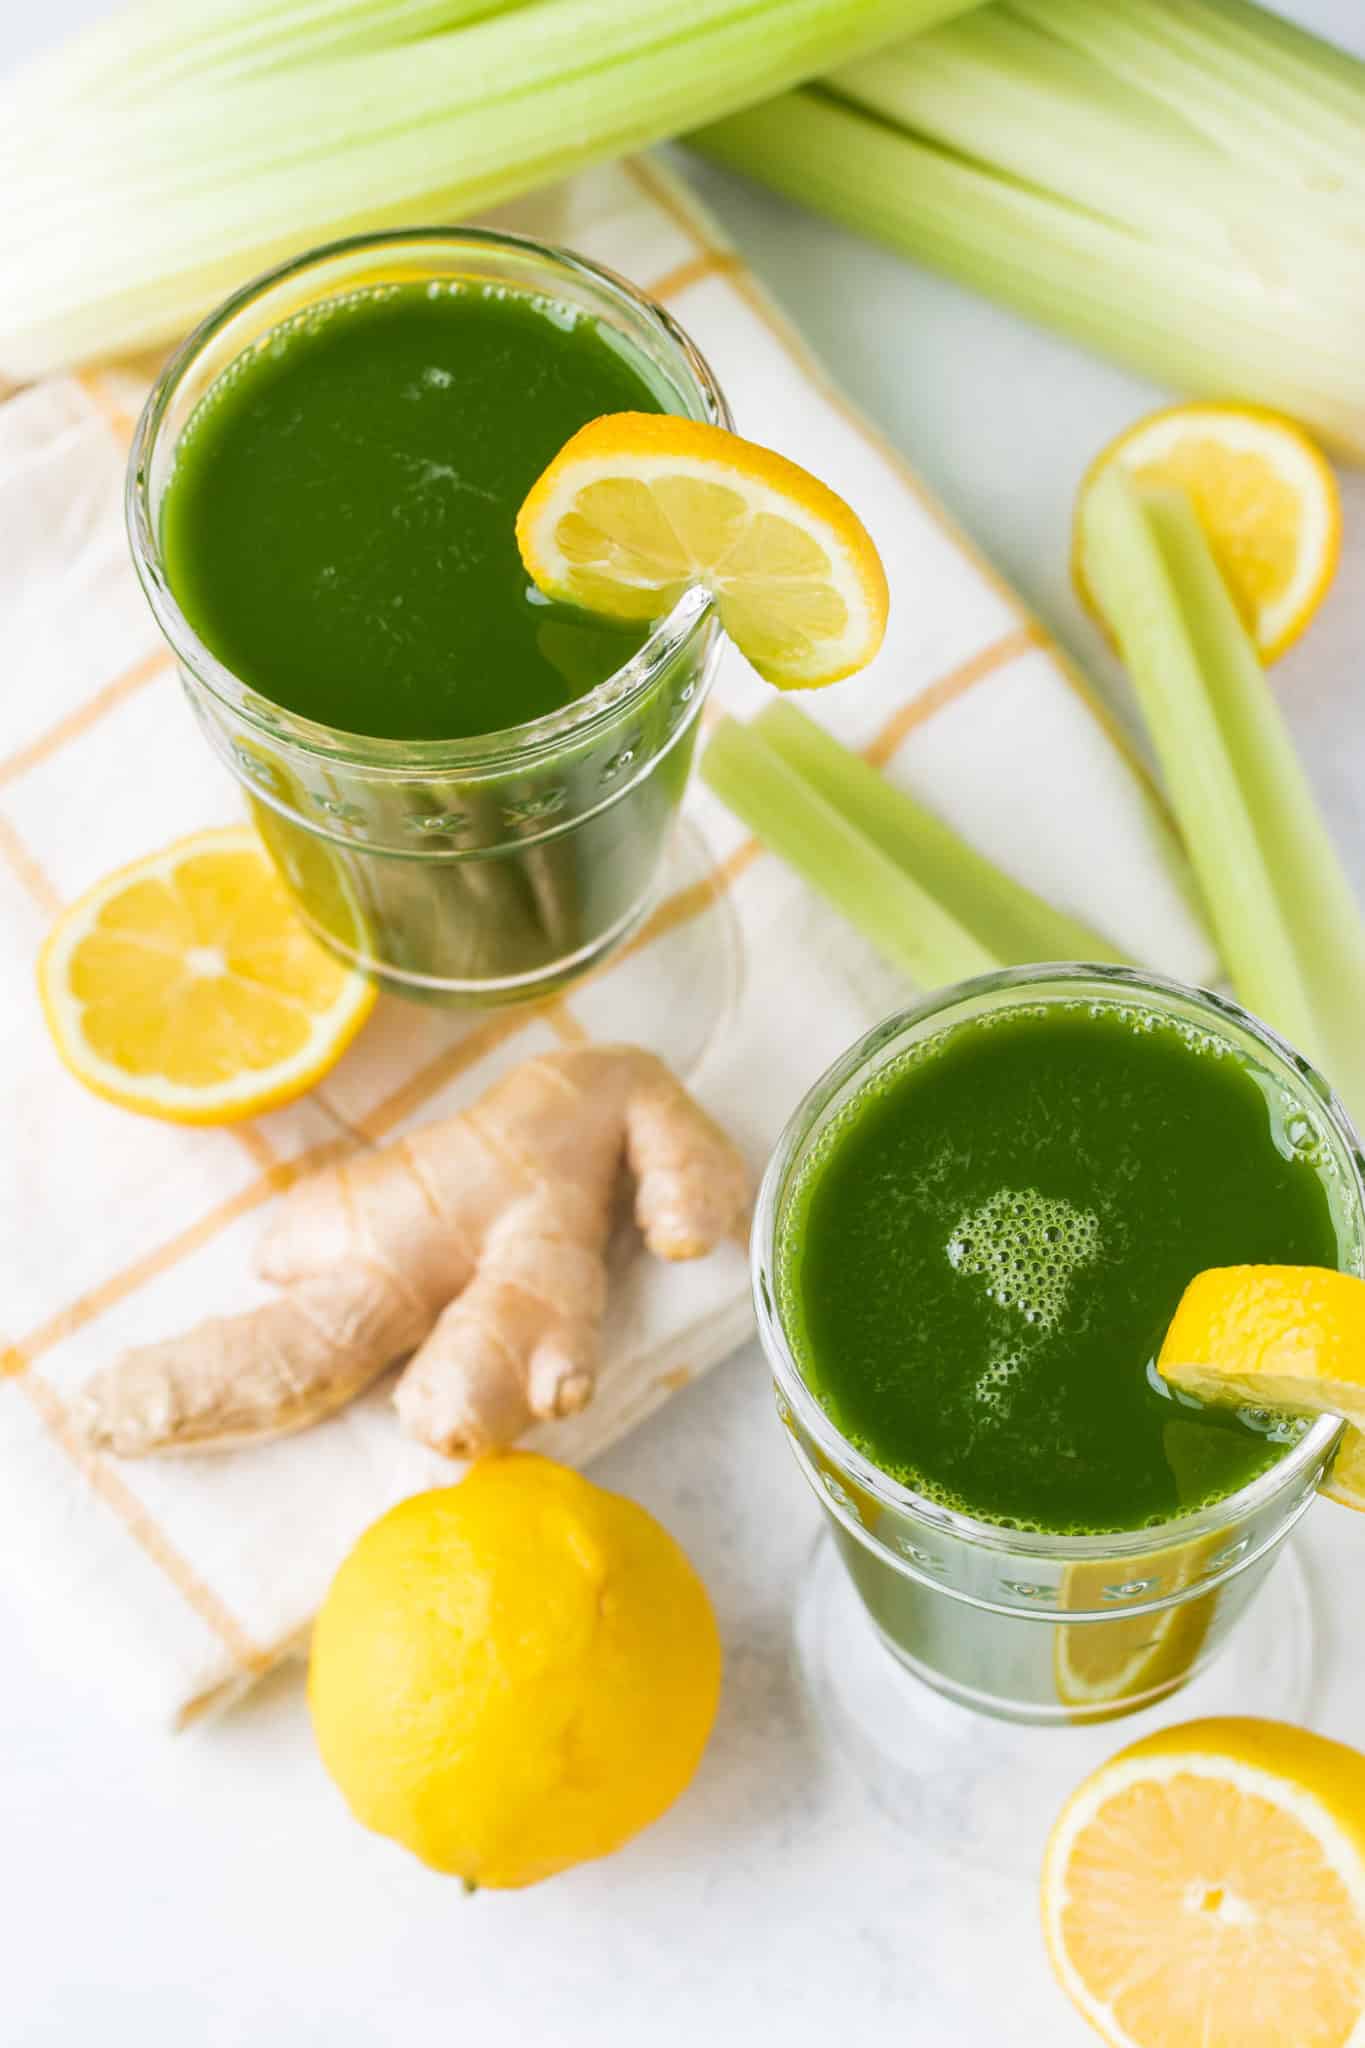 two glasses of green juice with lemon and celery sticks